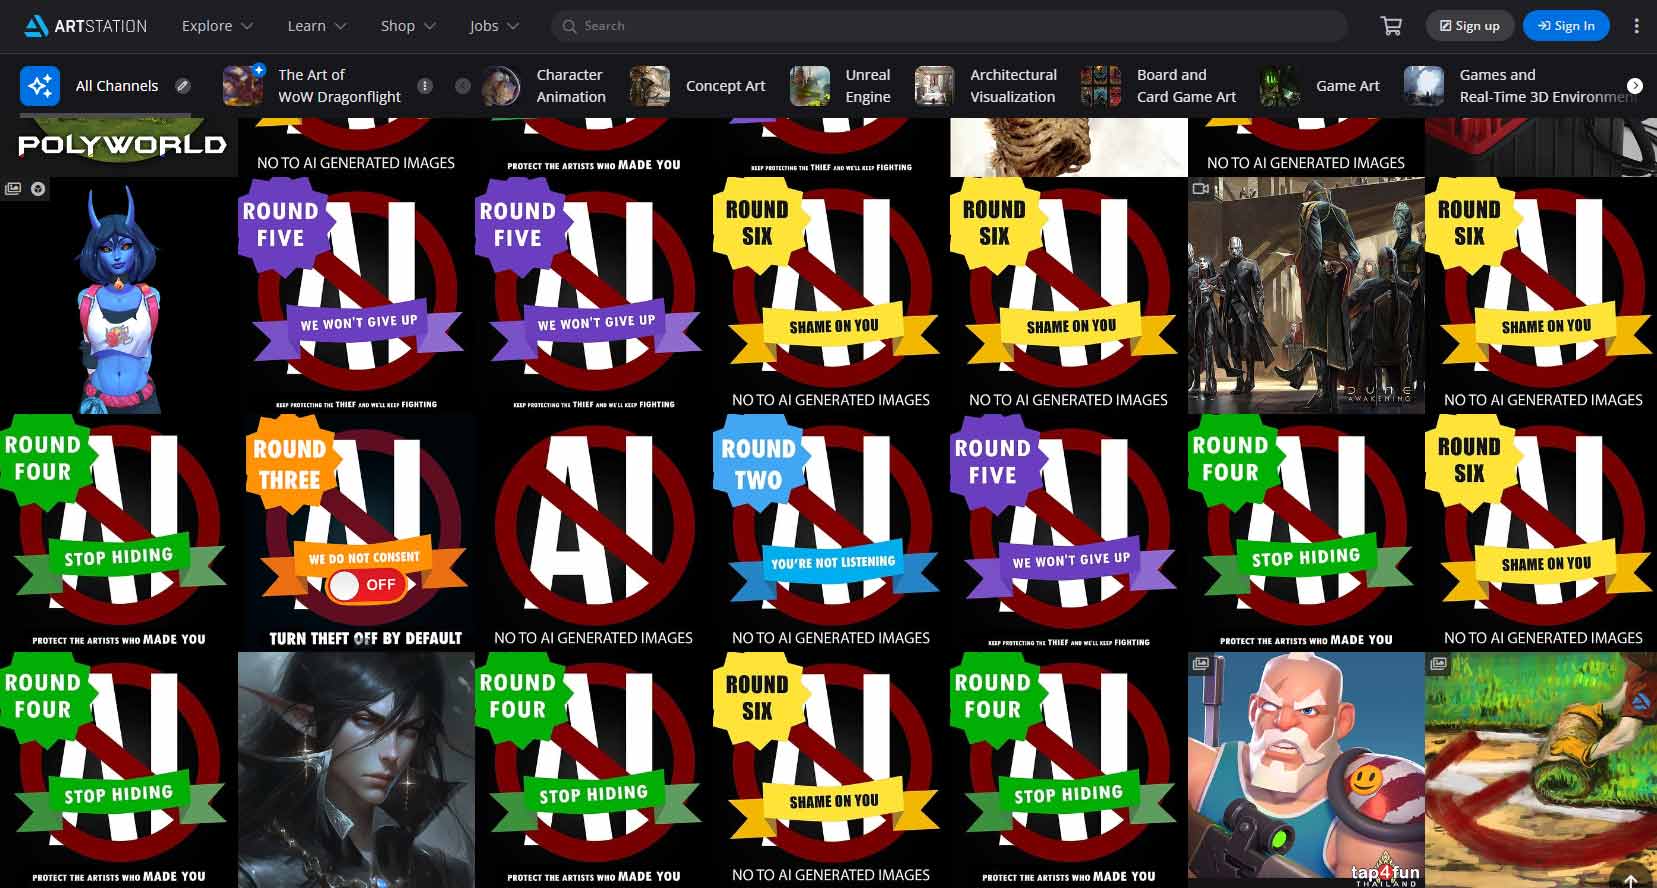 Art Station Feed showing users protesting against AI Generated Art. Source: Artstation.com